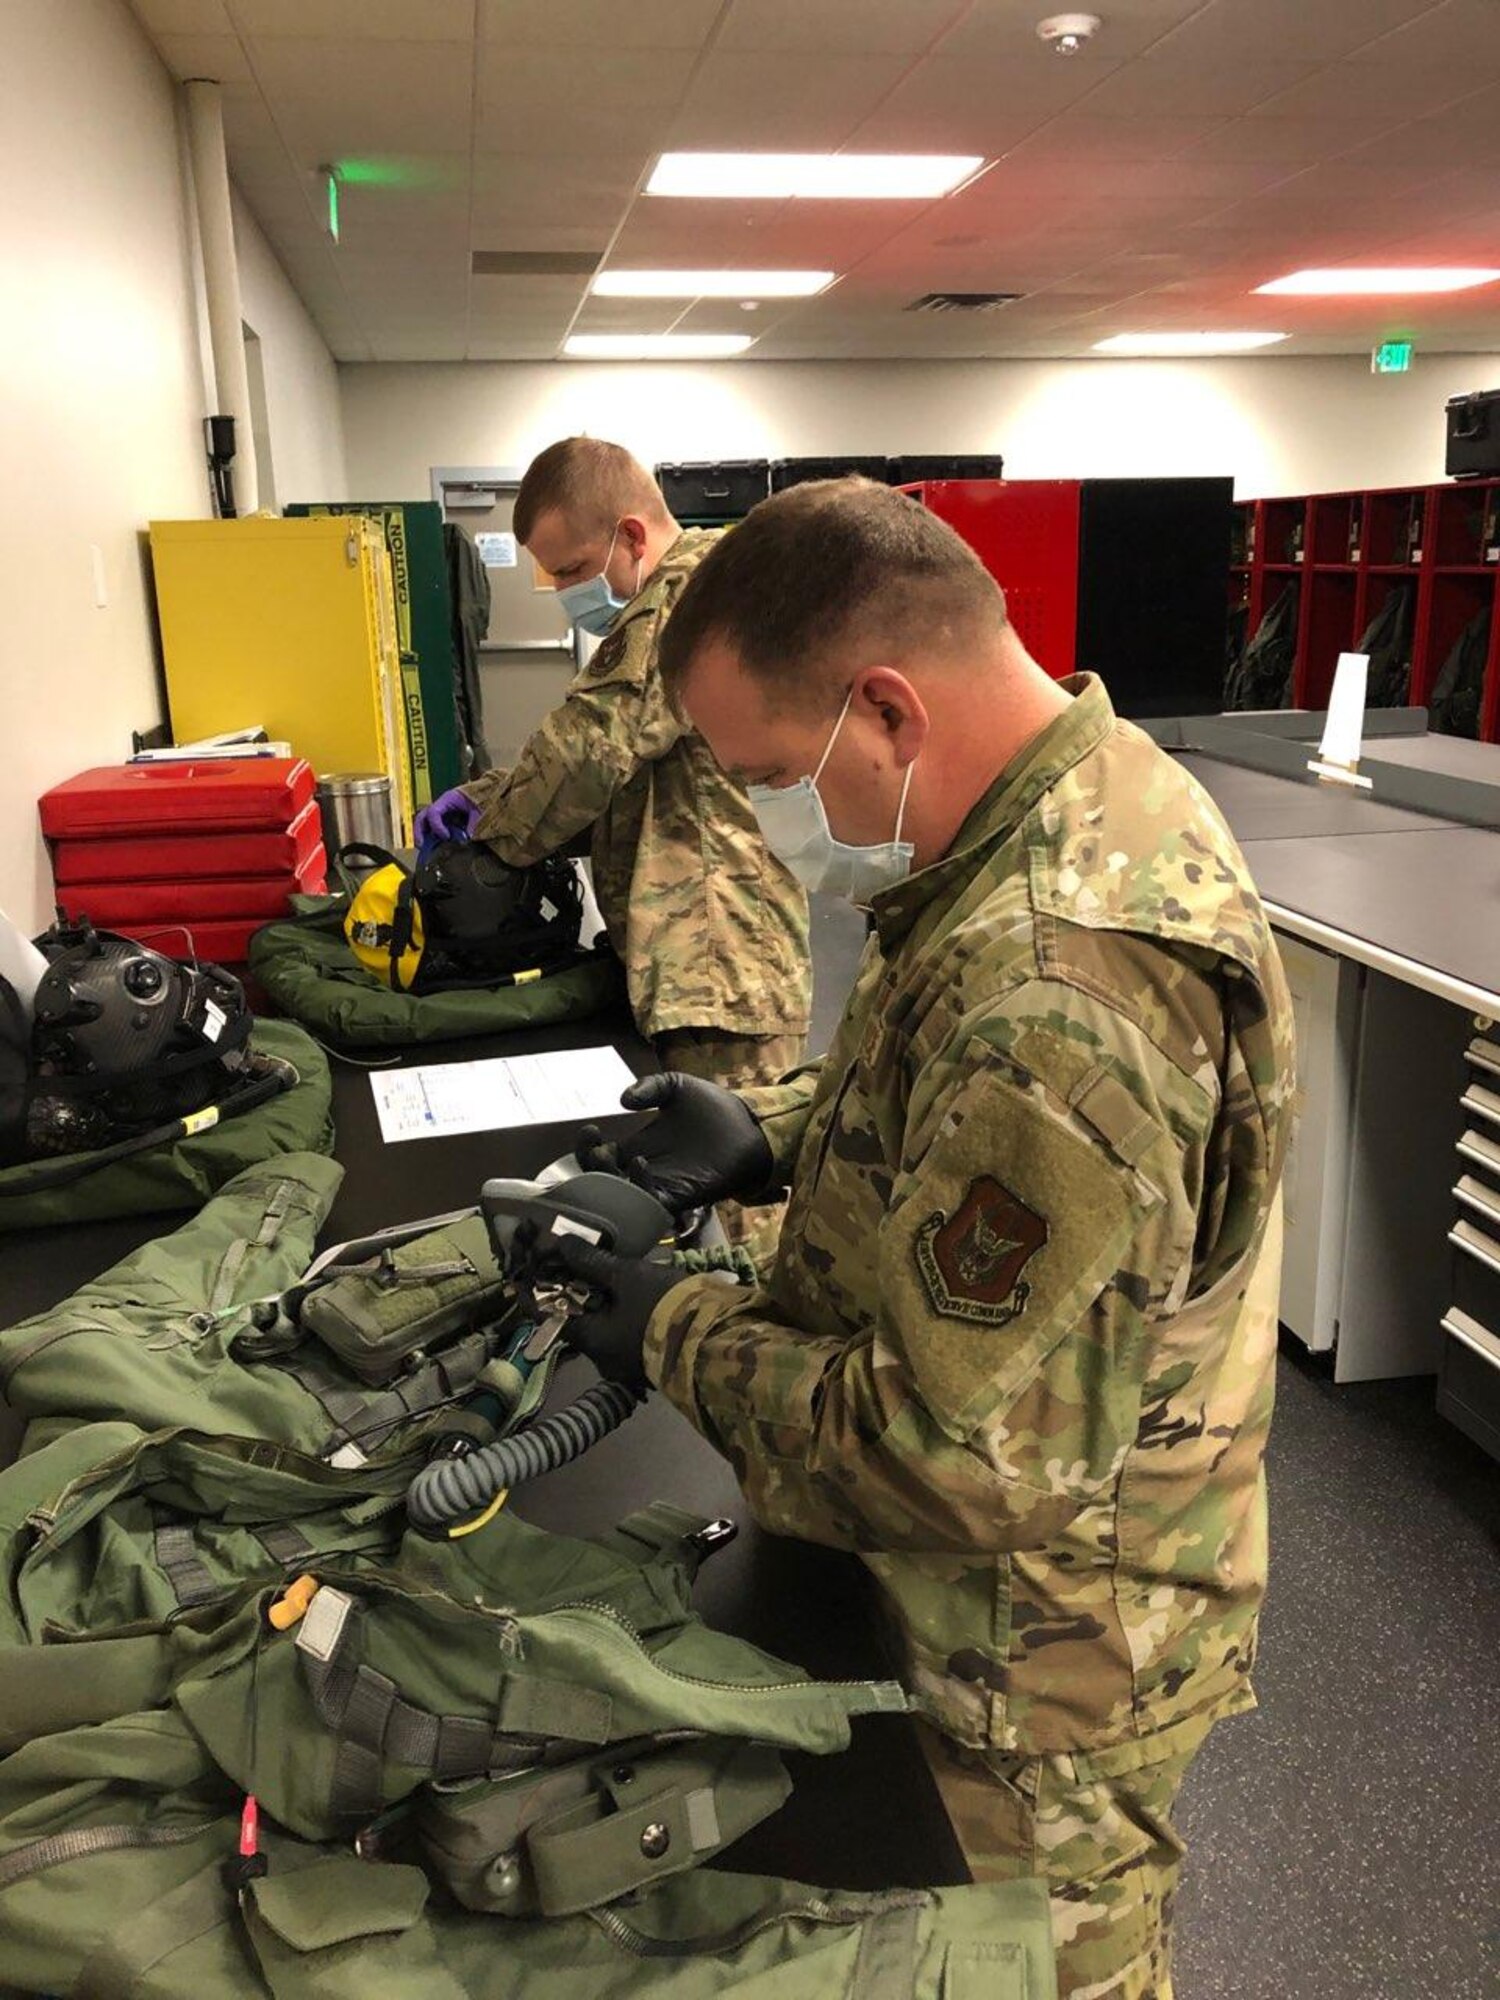 Tech. Sgt. William Vass and Tech. Sgt. Corey Johnson from the Aircrew Flight Equipment shop in the 419th Operations Support Squadron conduct quality control inspections on pilot flight gear.